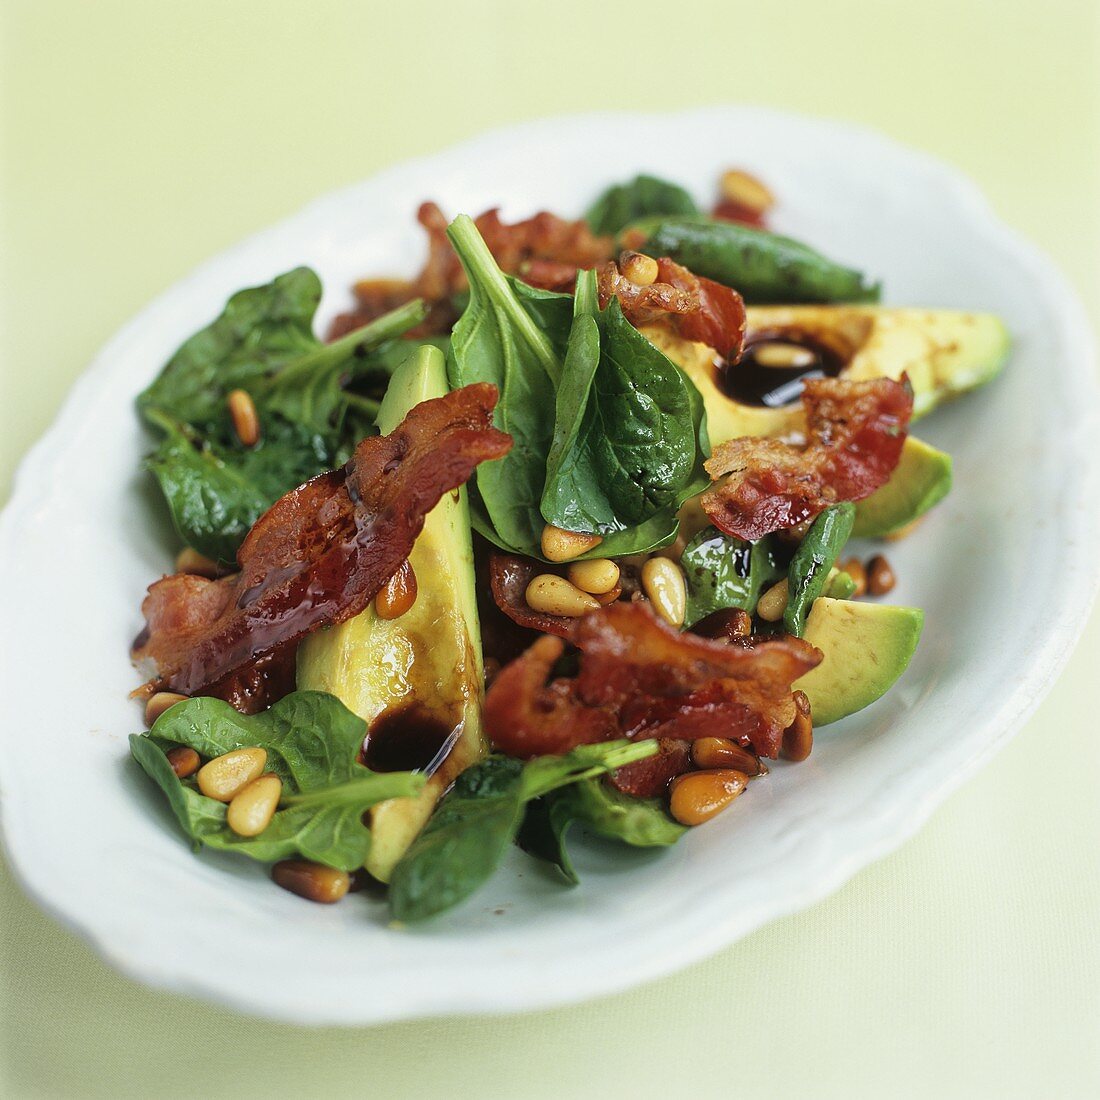 Spinach and avocado salad with fried bacon and pine nuts